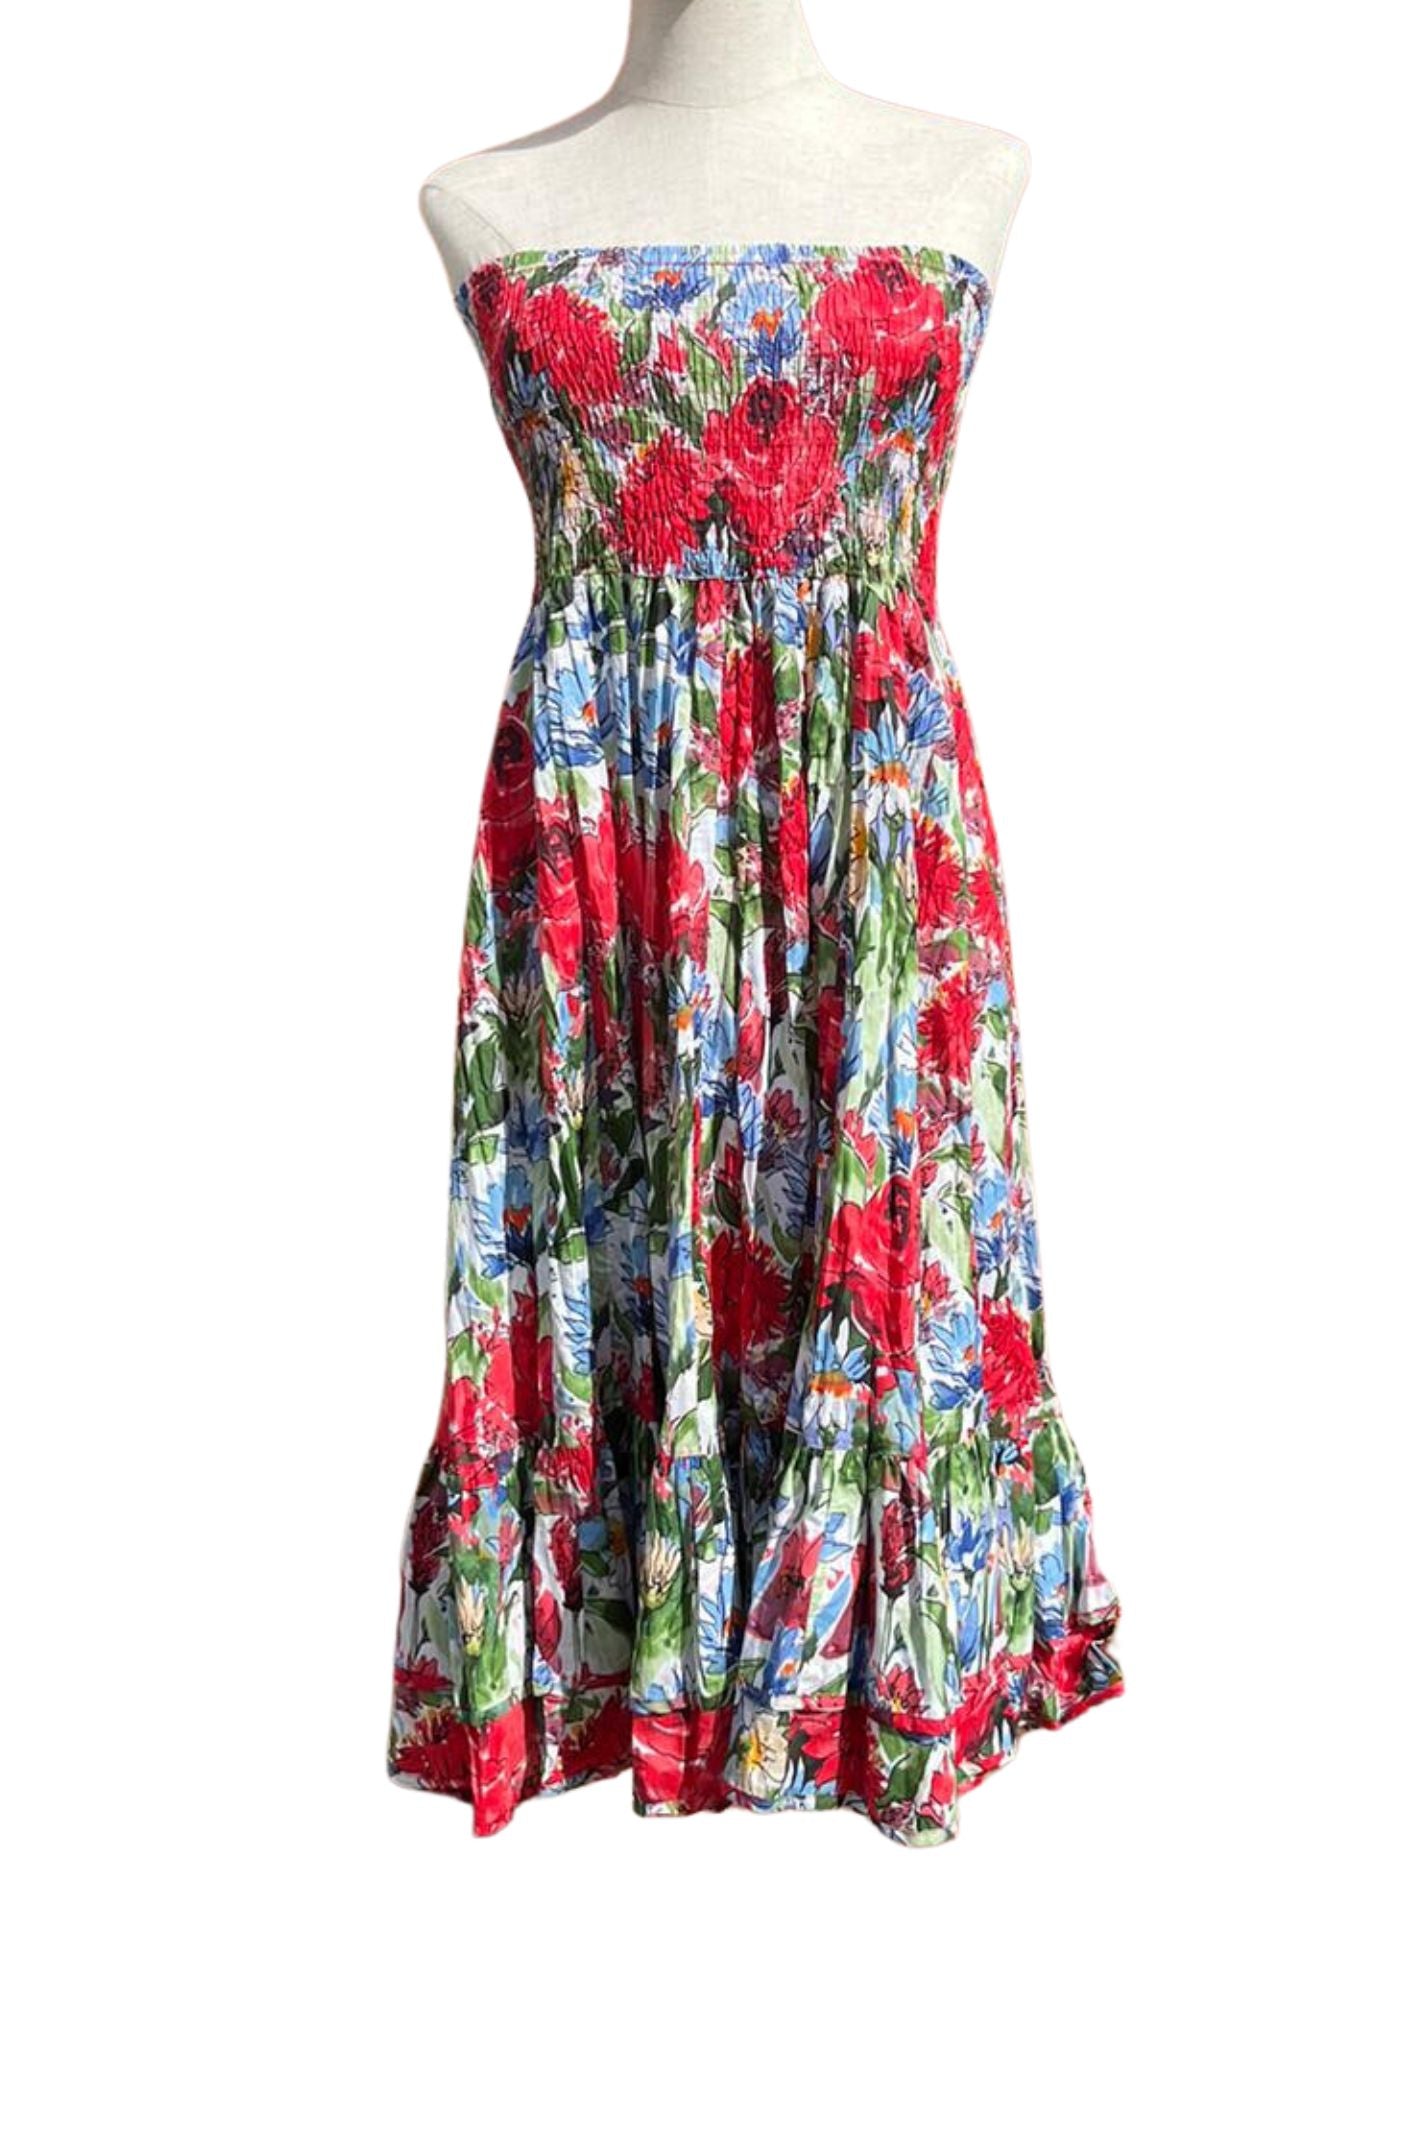 Dress Addict Jaja 303 Red Floral 2-in-1 Skirt Dress – Experience